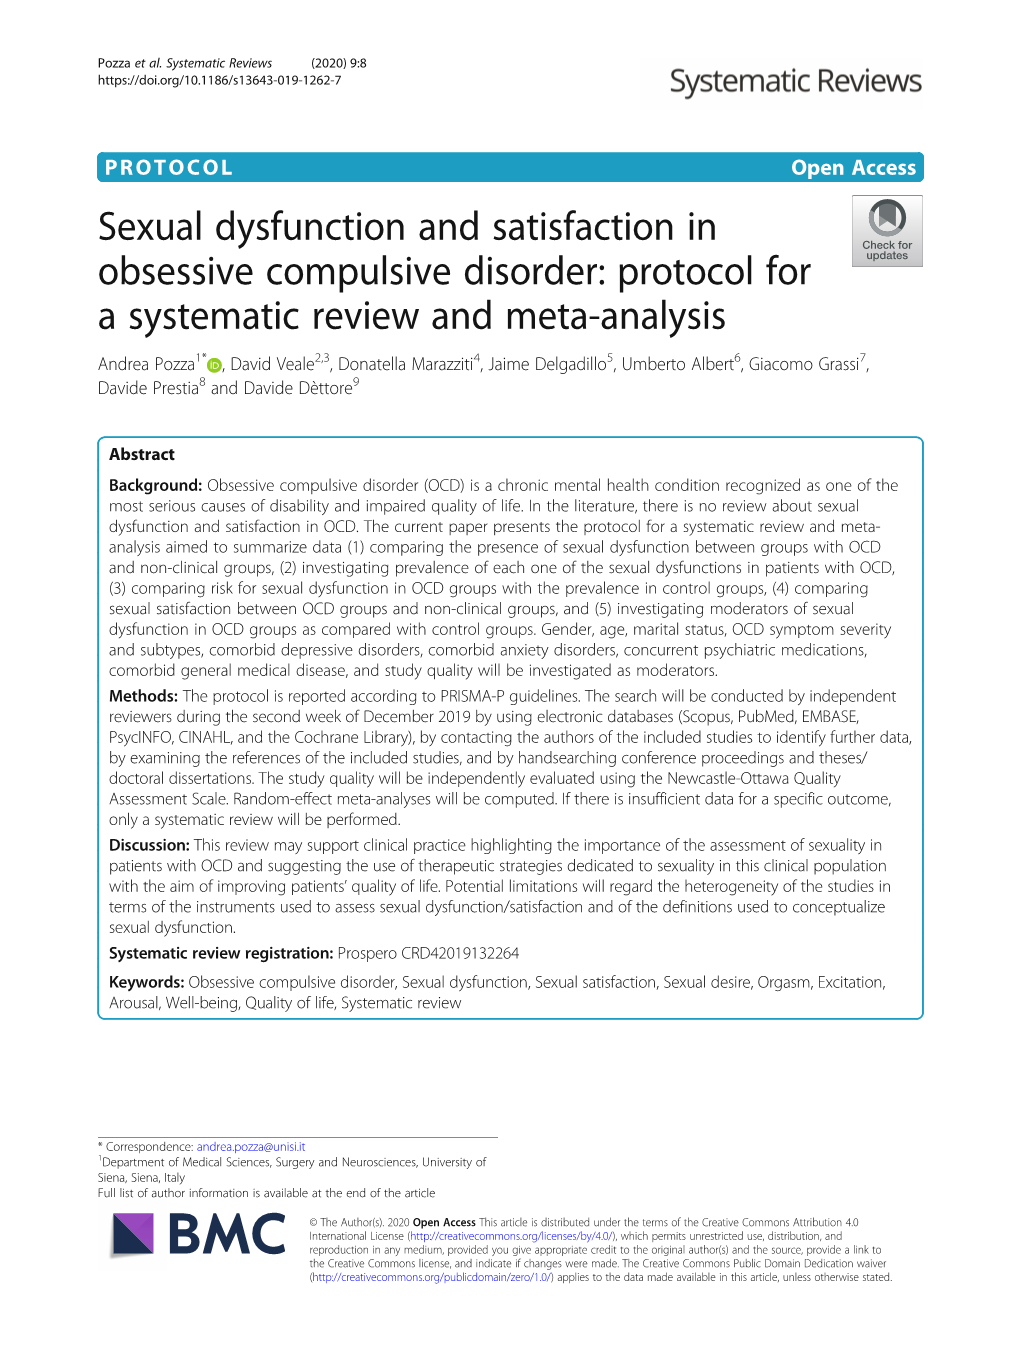 Sexual Dysfunction and Satisfaction in Obsessive Compulsive Disorder: Protocol for a Systematic Review and Meta-Analysis